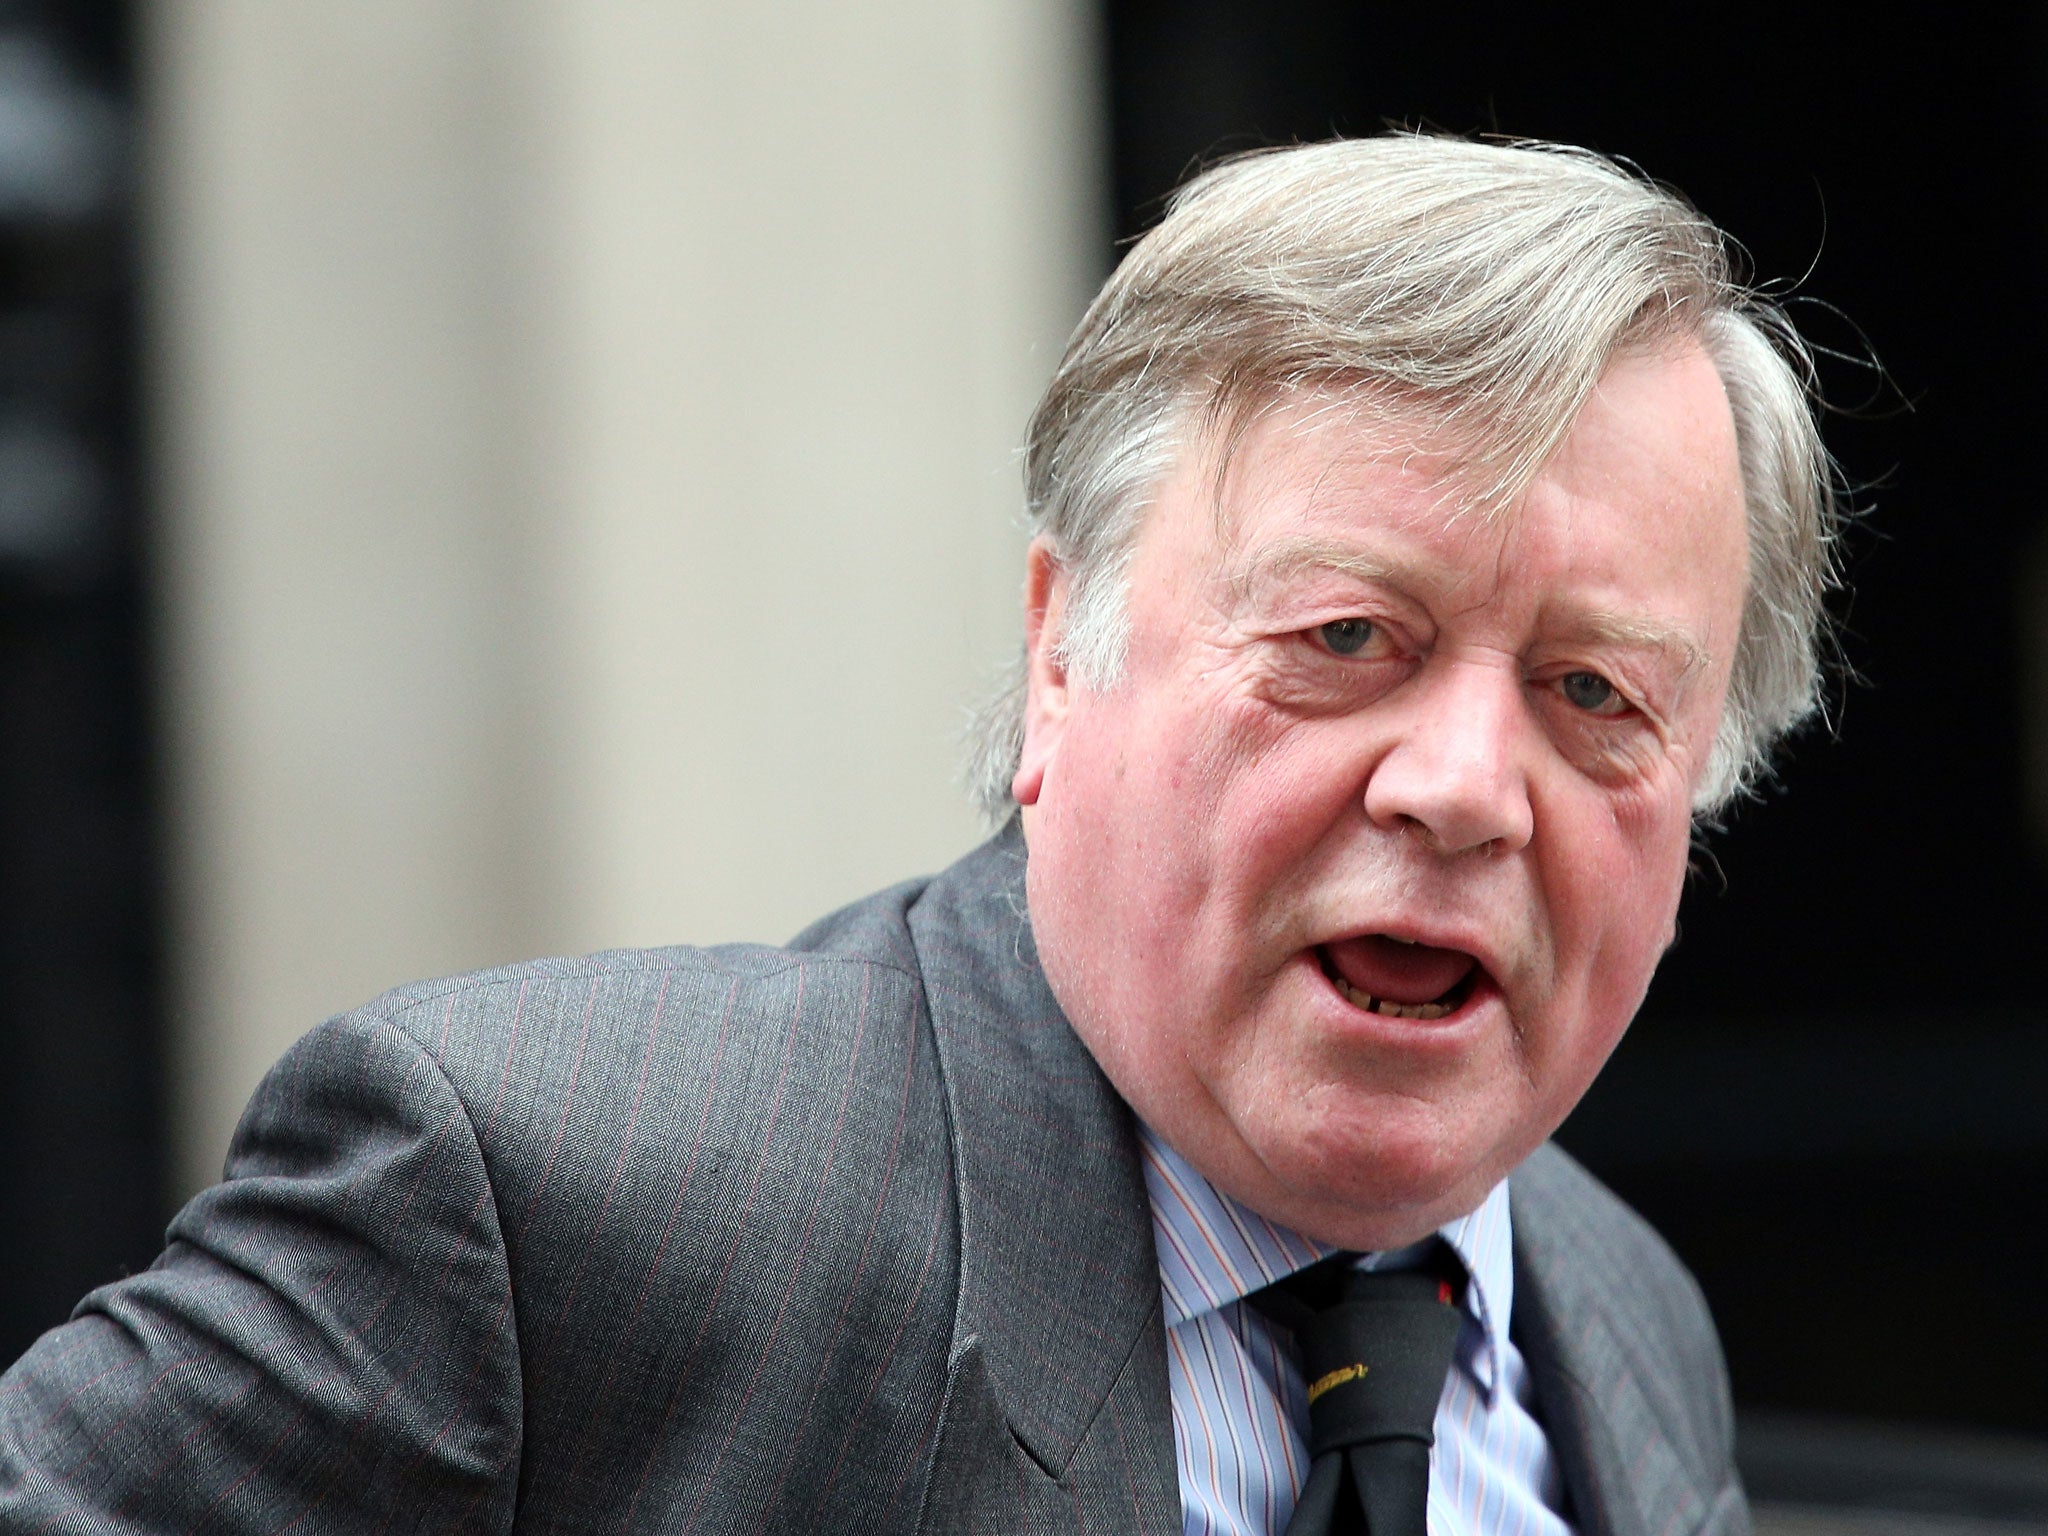 Kenneth Clarke insisted most Tory ministers wanted Britain to remain in the European Union